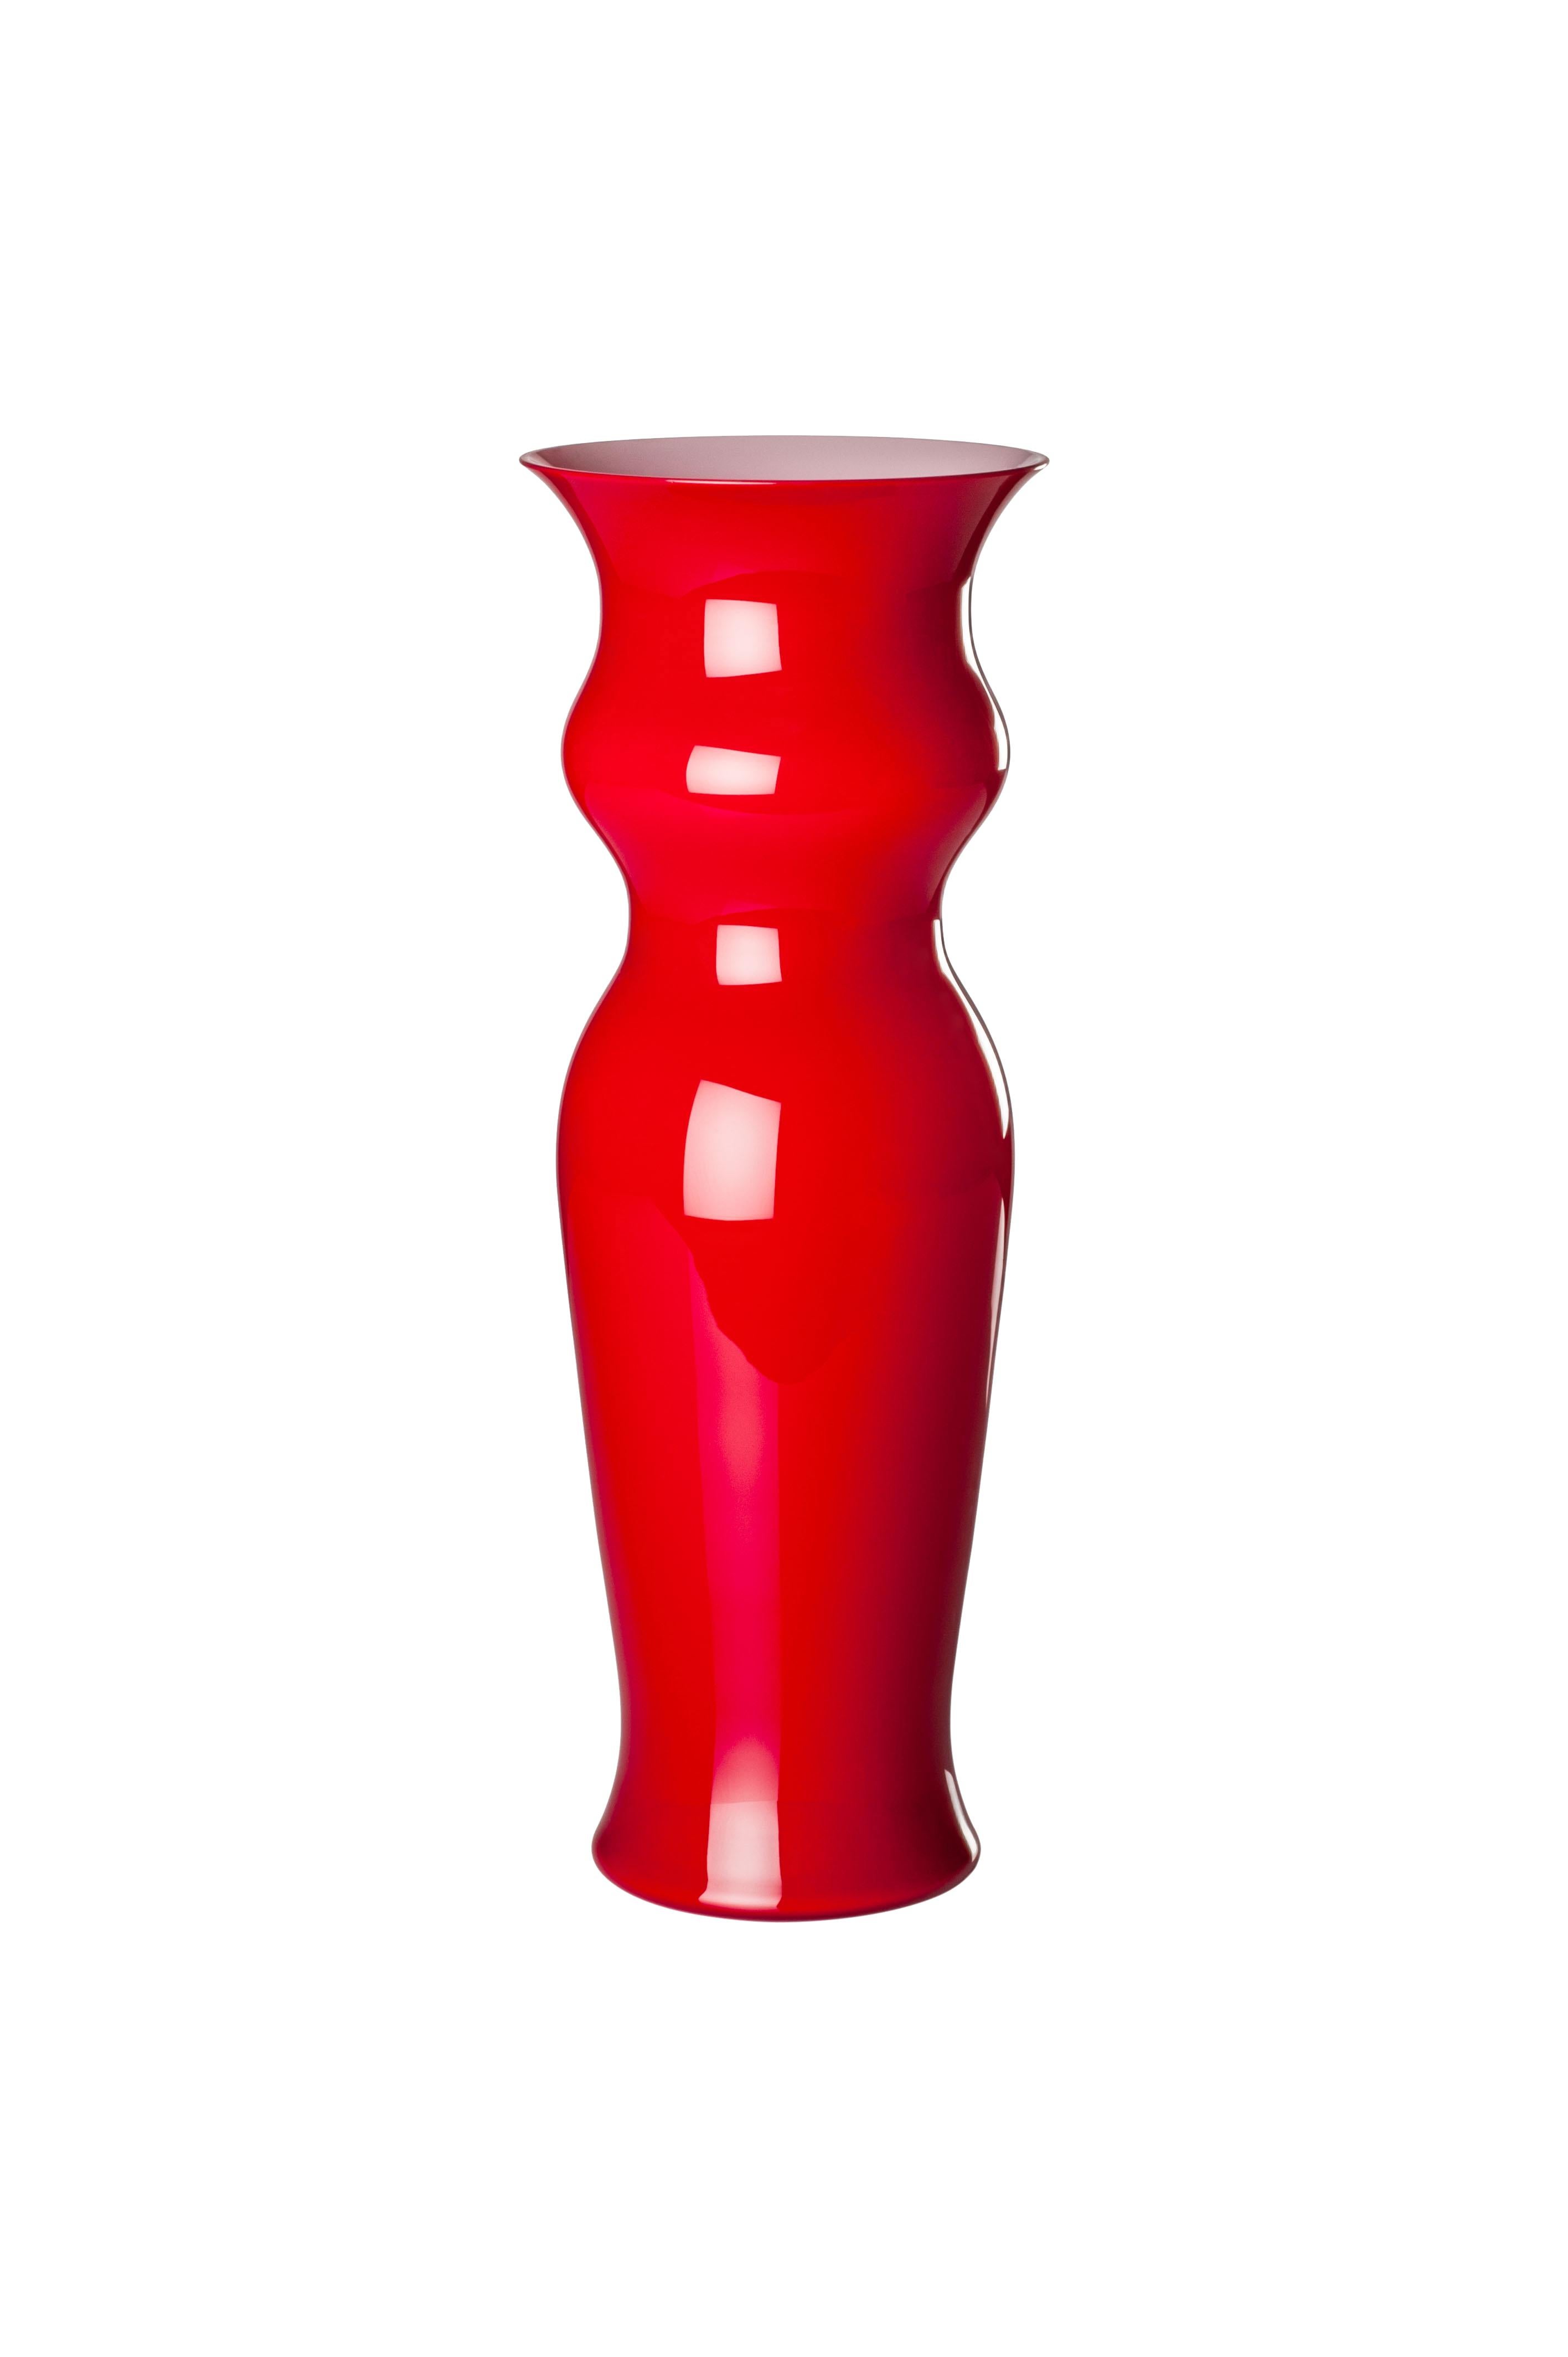 Venini glass vase with thin body and neck and elegant design by Leonardo Ranucci in 2009. Featured in red colored glass. Perfect for indoor home decor as container or strong statement piece for any room. Numbered edition for year.

Dimensions: 16